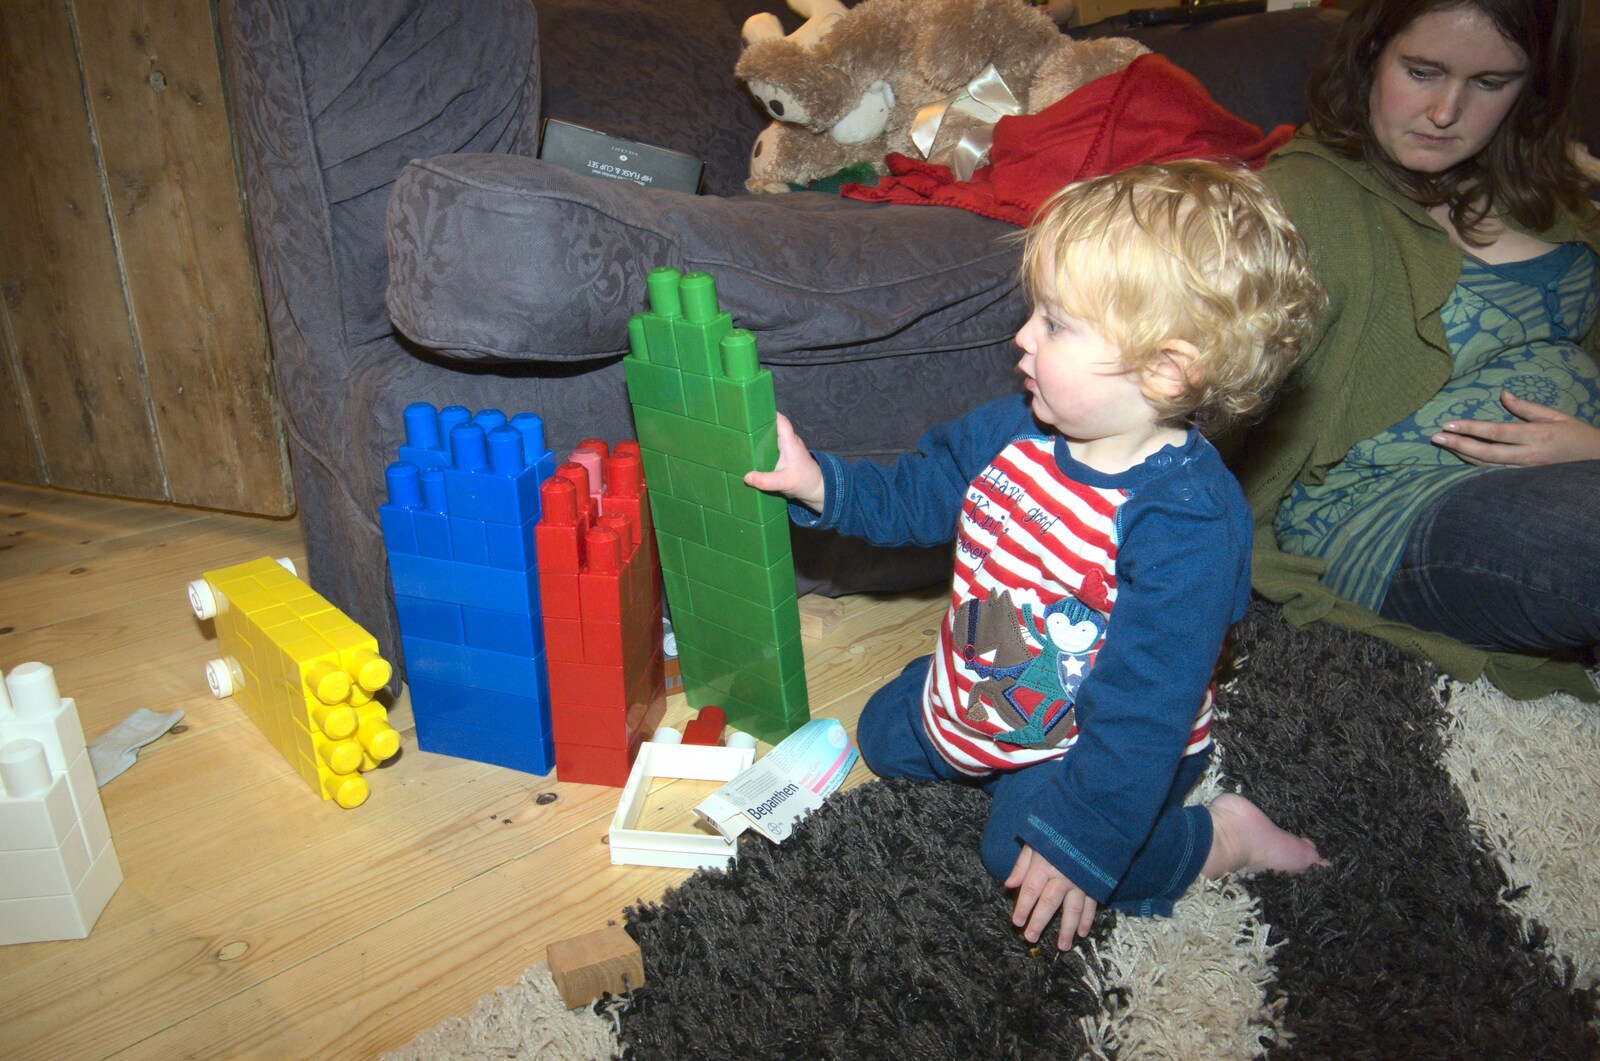 The Boy builds big towers out of Mega Blocks from Snow in Diss, Fred Walks, and The BBs Play a Wedding, Diss and Mendlesham - 18th December 2009